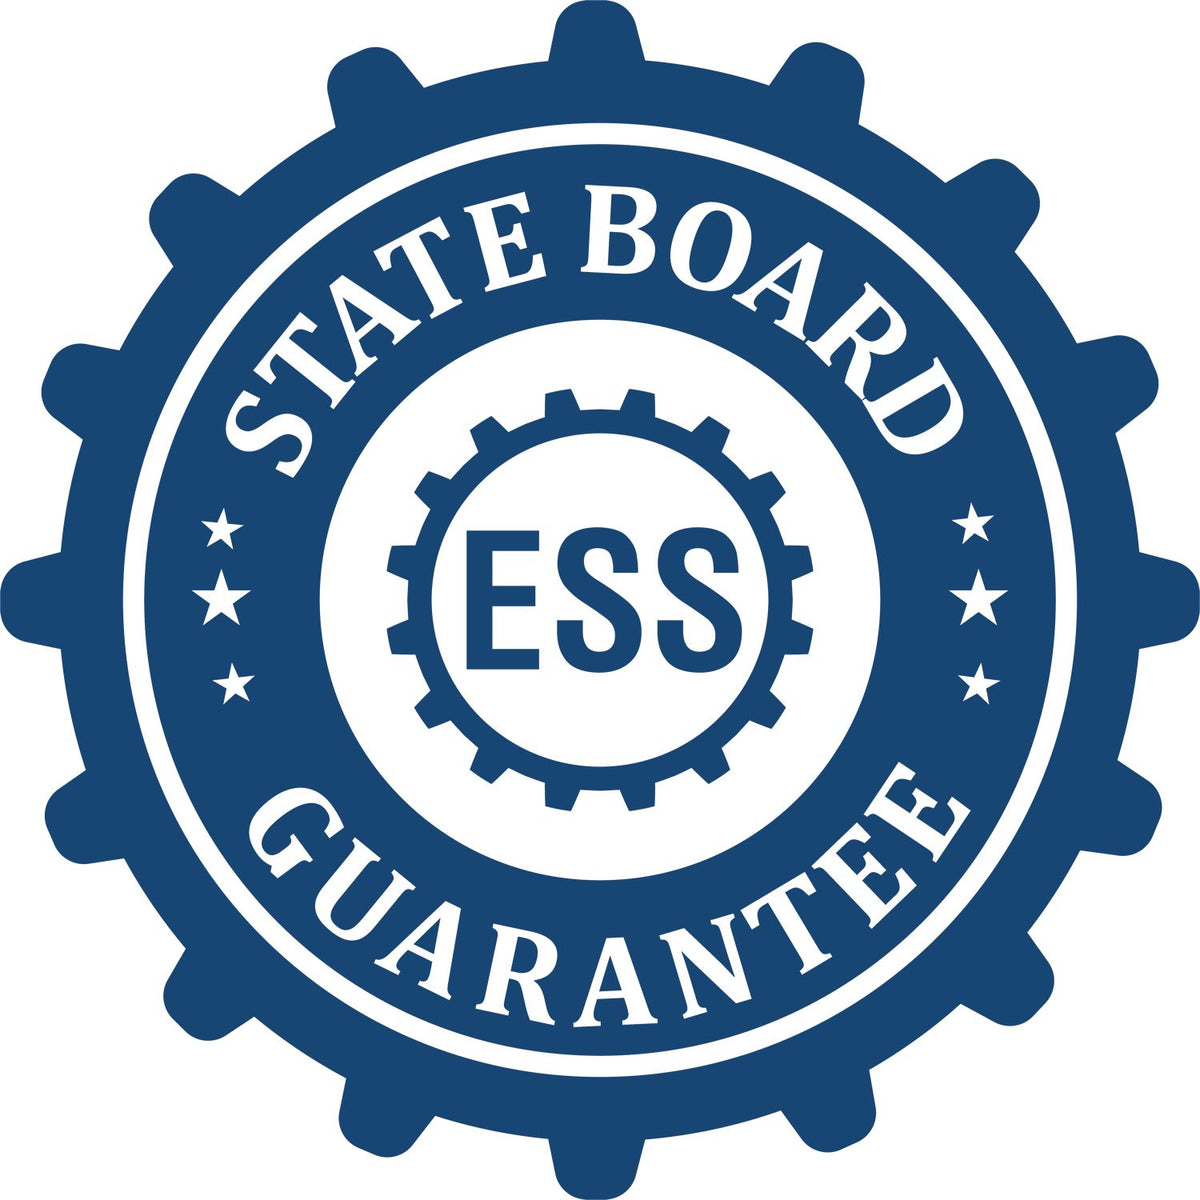 An emblem in a gear shape illustrating a state board guarantee for the State of New Hampshire Extended Long Reach Geologist Seal